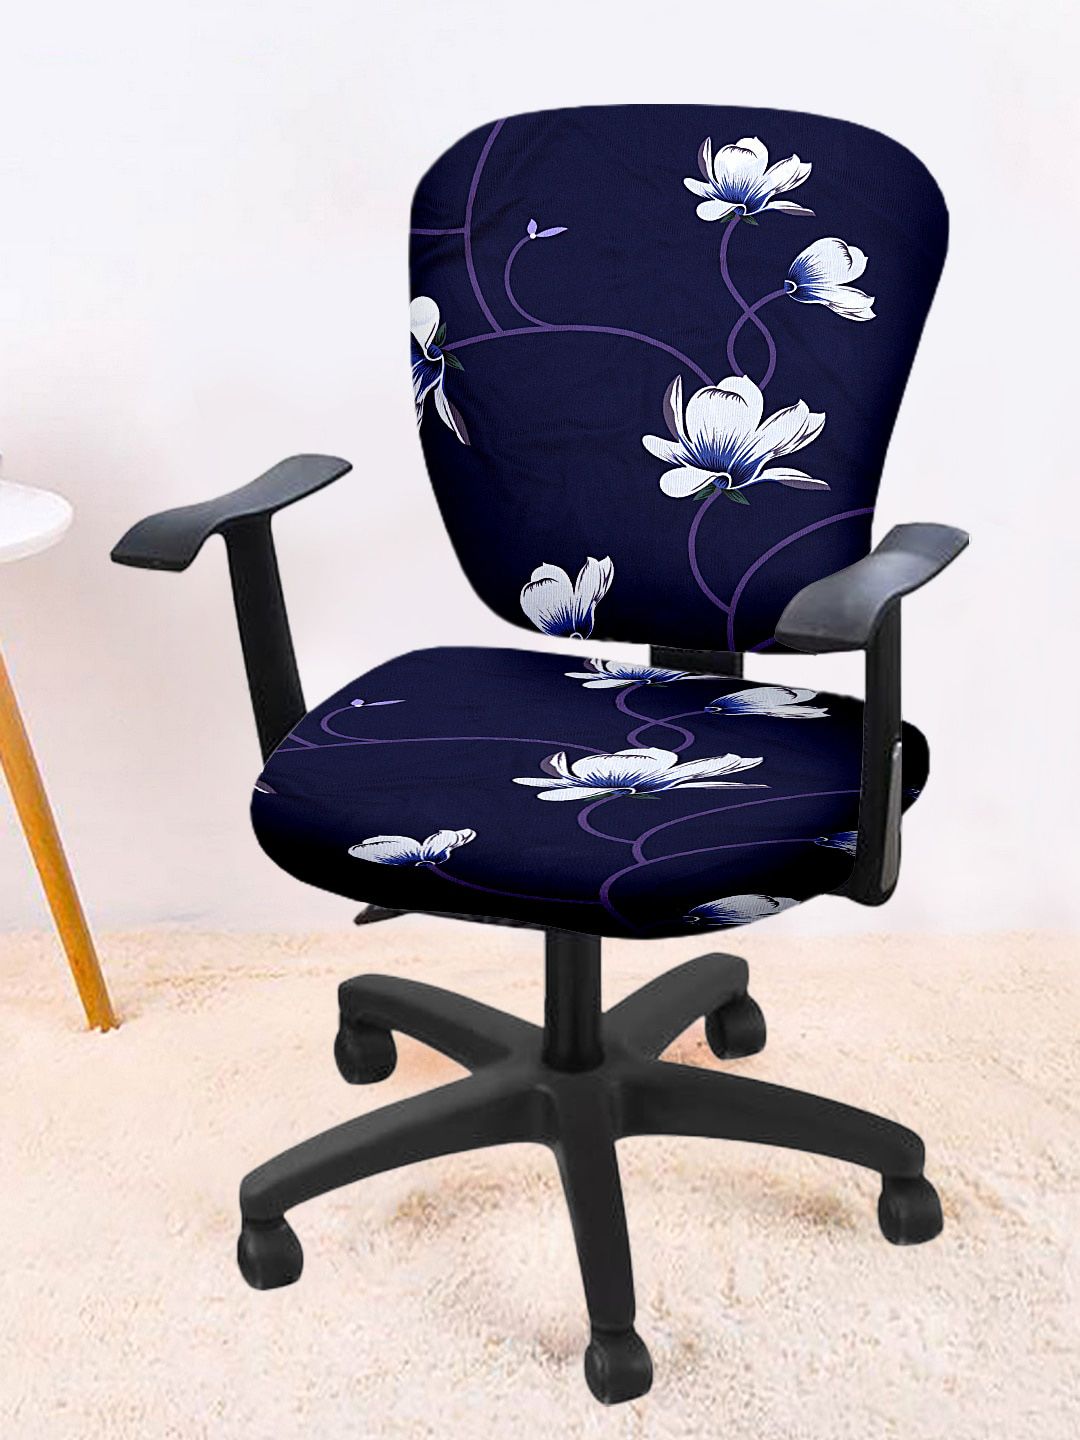 Cortina Set Of 4 Navy Blue & White Floral Print Chair Covers Price in India